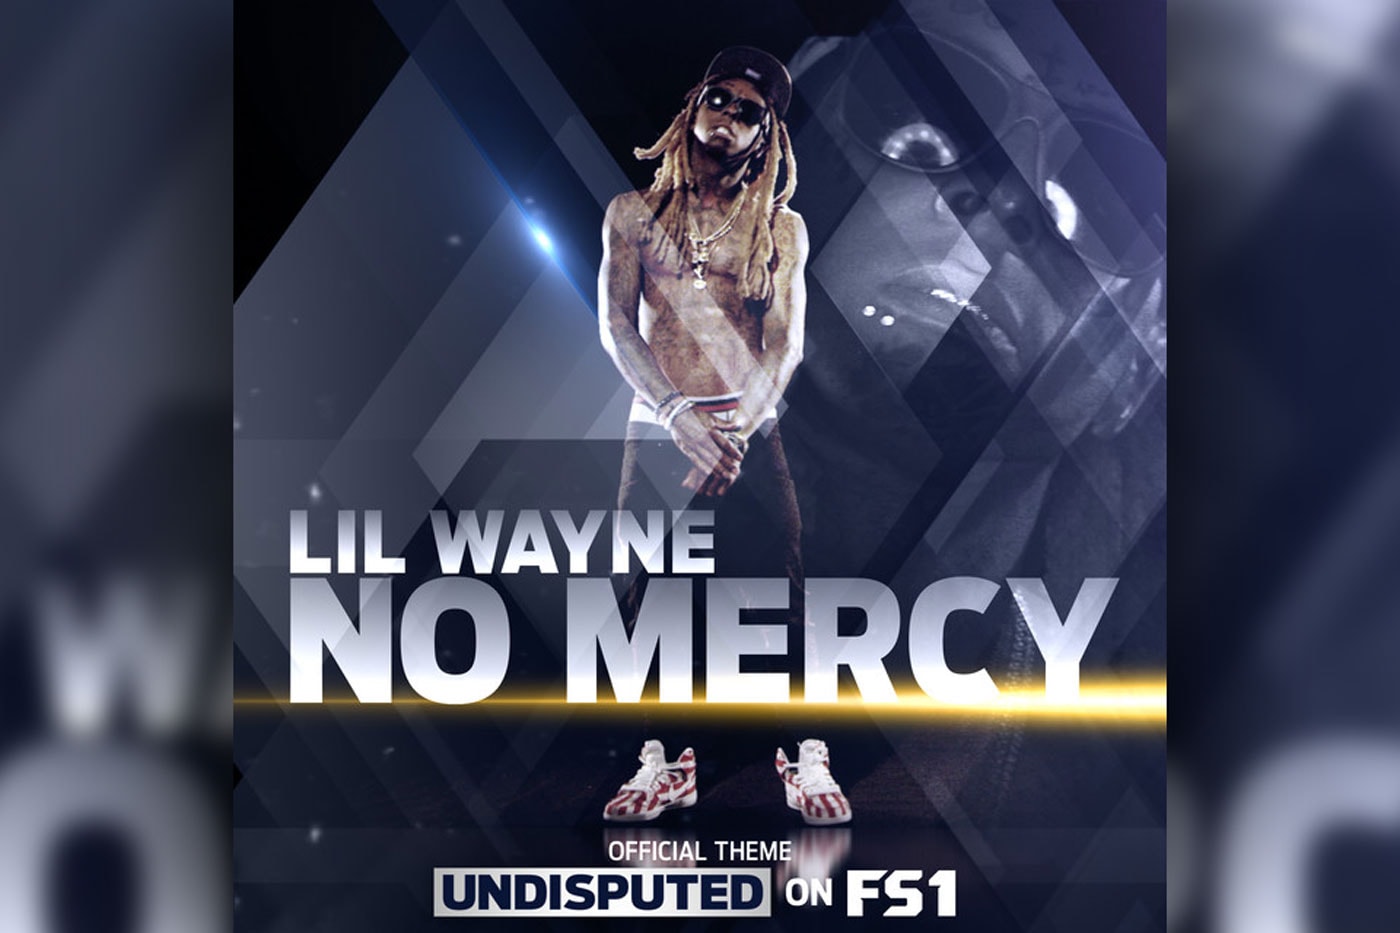 Check Out "No Mercy," Lil Wayne's Theme Song For ‘Skip And Shannon: Undisputed’